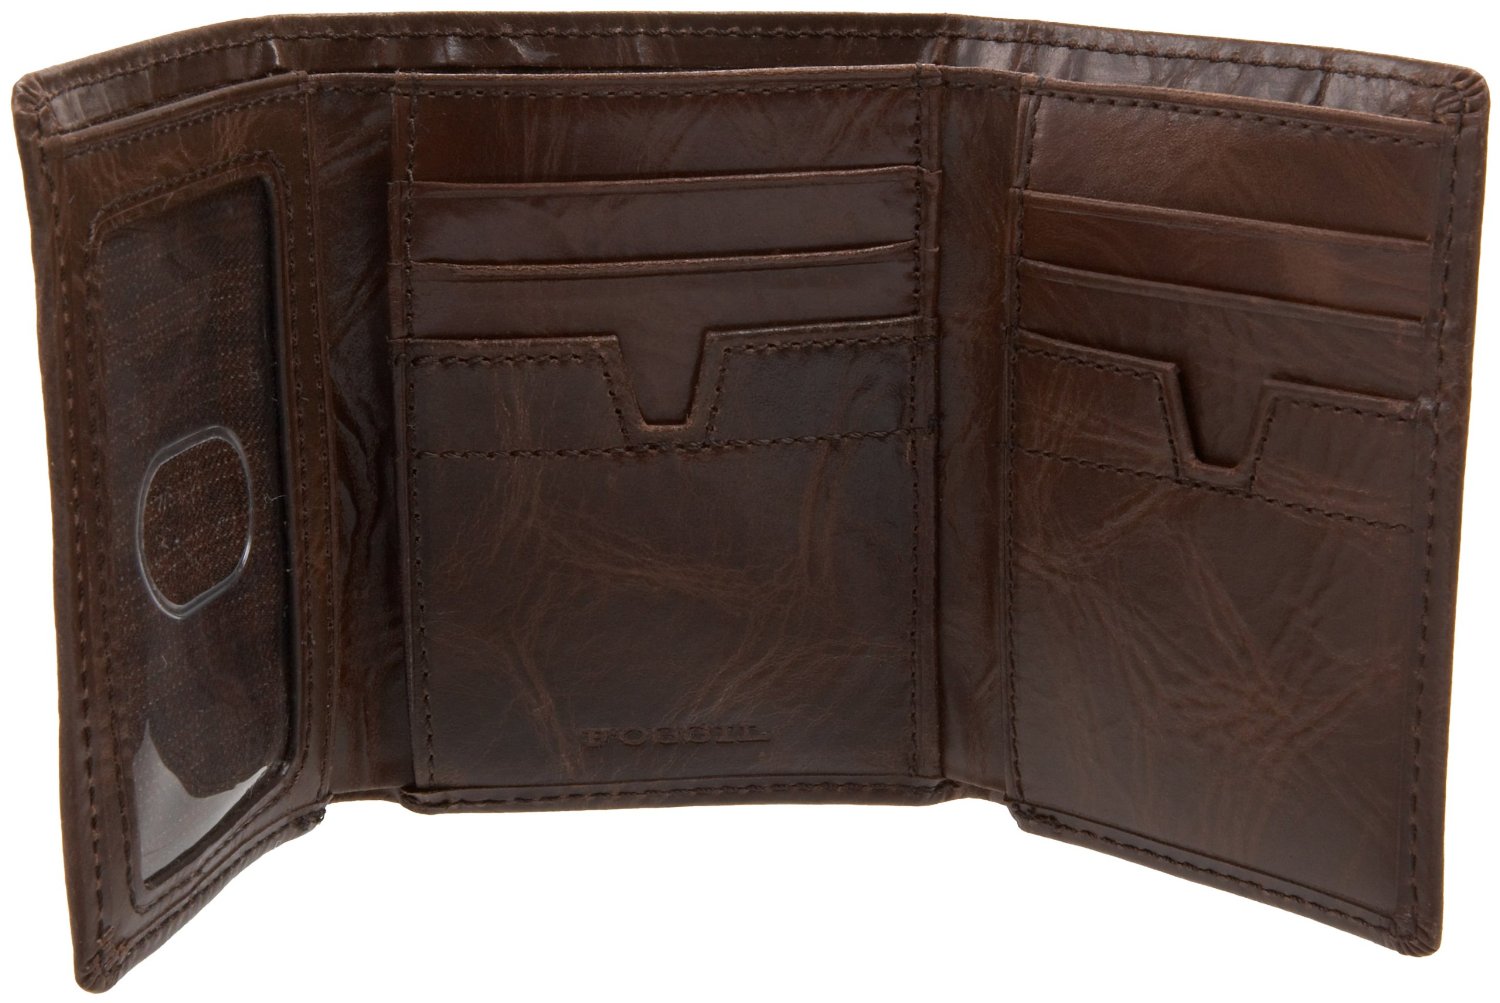 Pro Collection: Fossil Flyby Tri-Fold Wallet